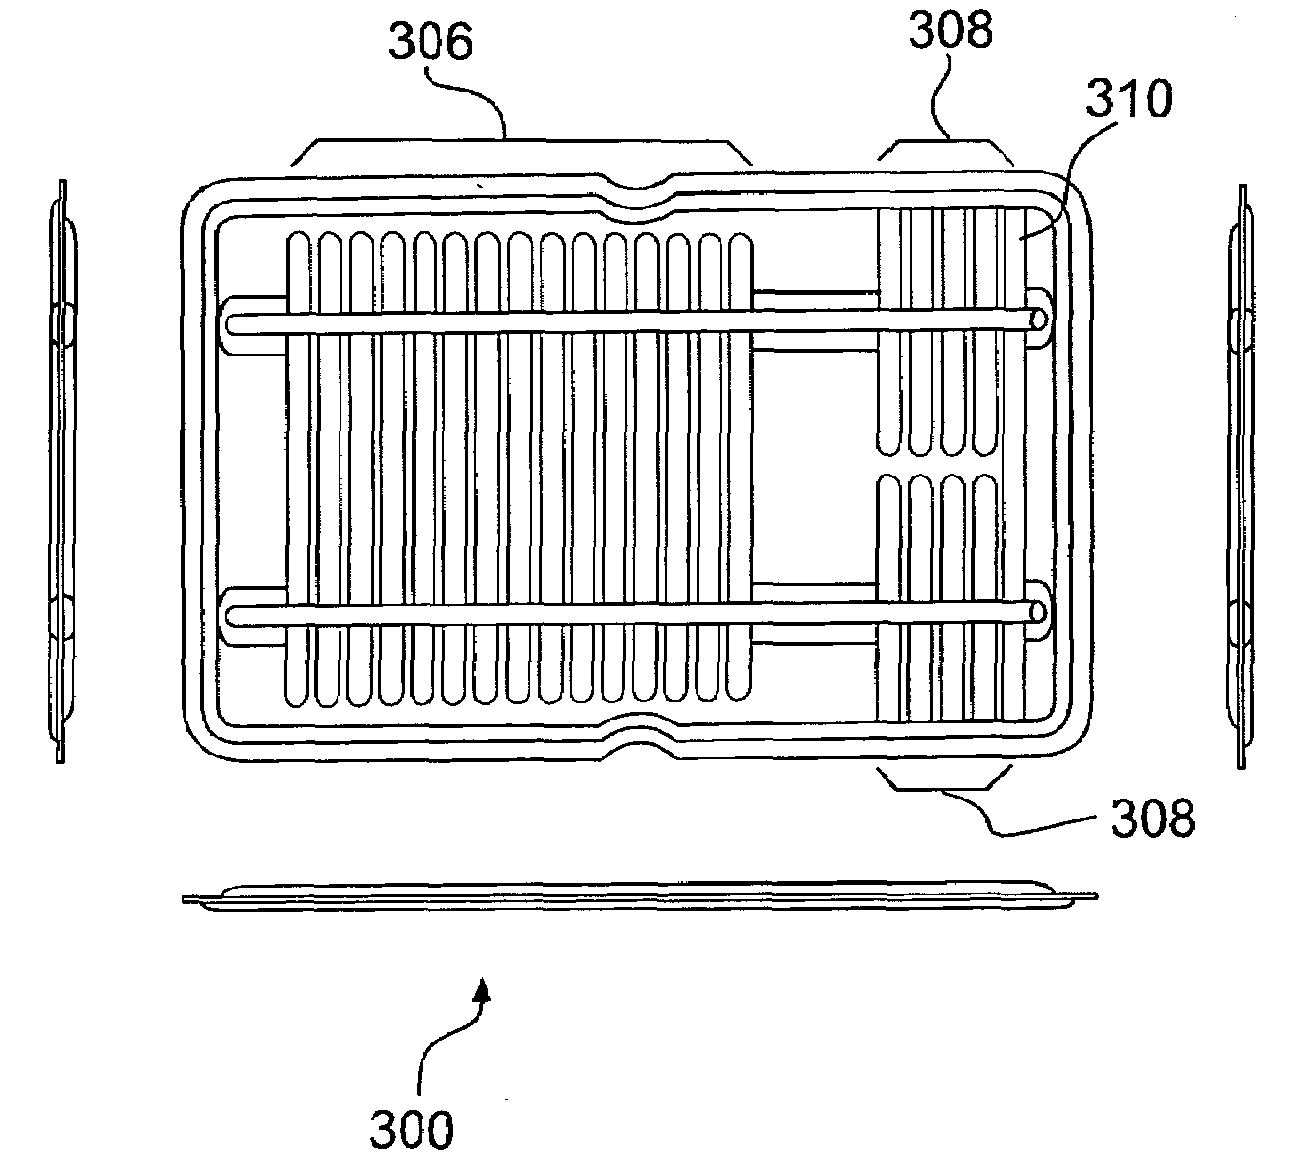 Packaging system for brachytherapy devices